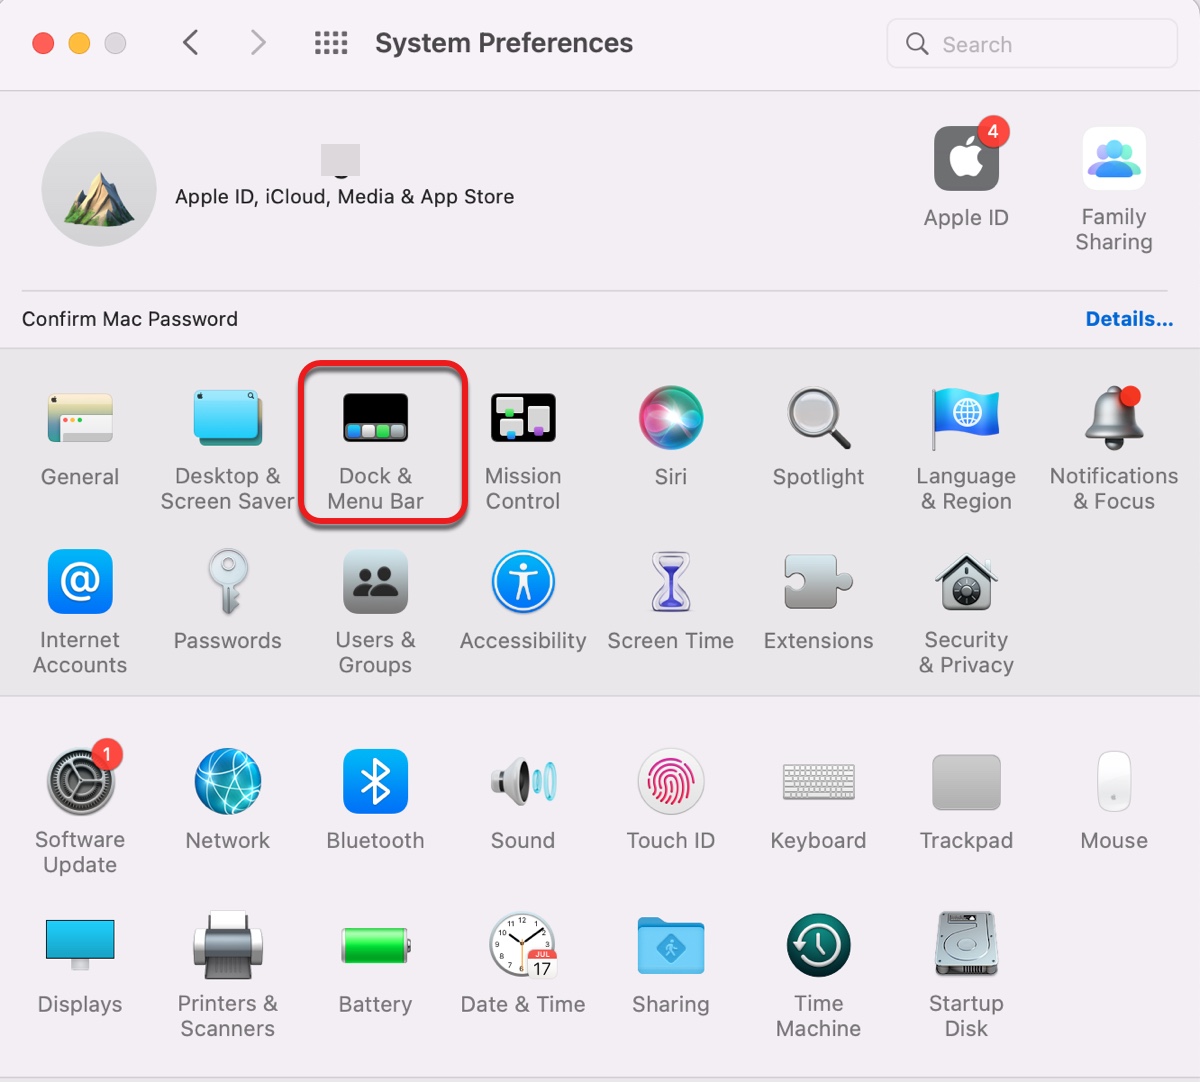 Open Dock and Menu Bar in System Preferences